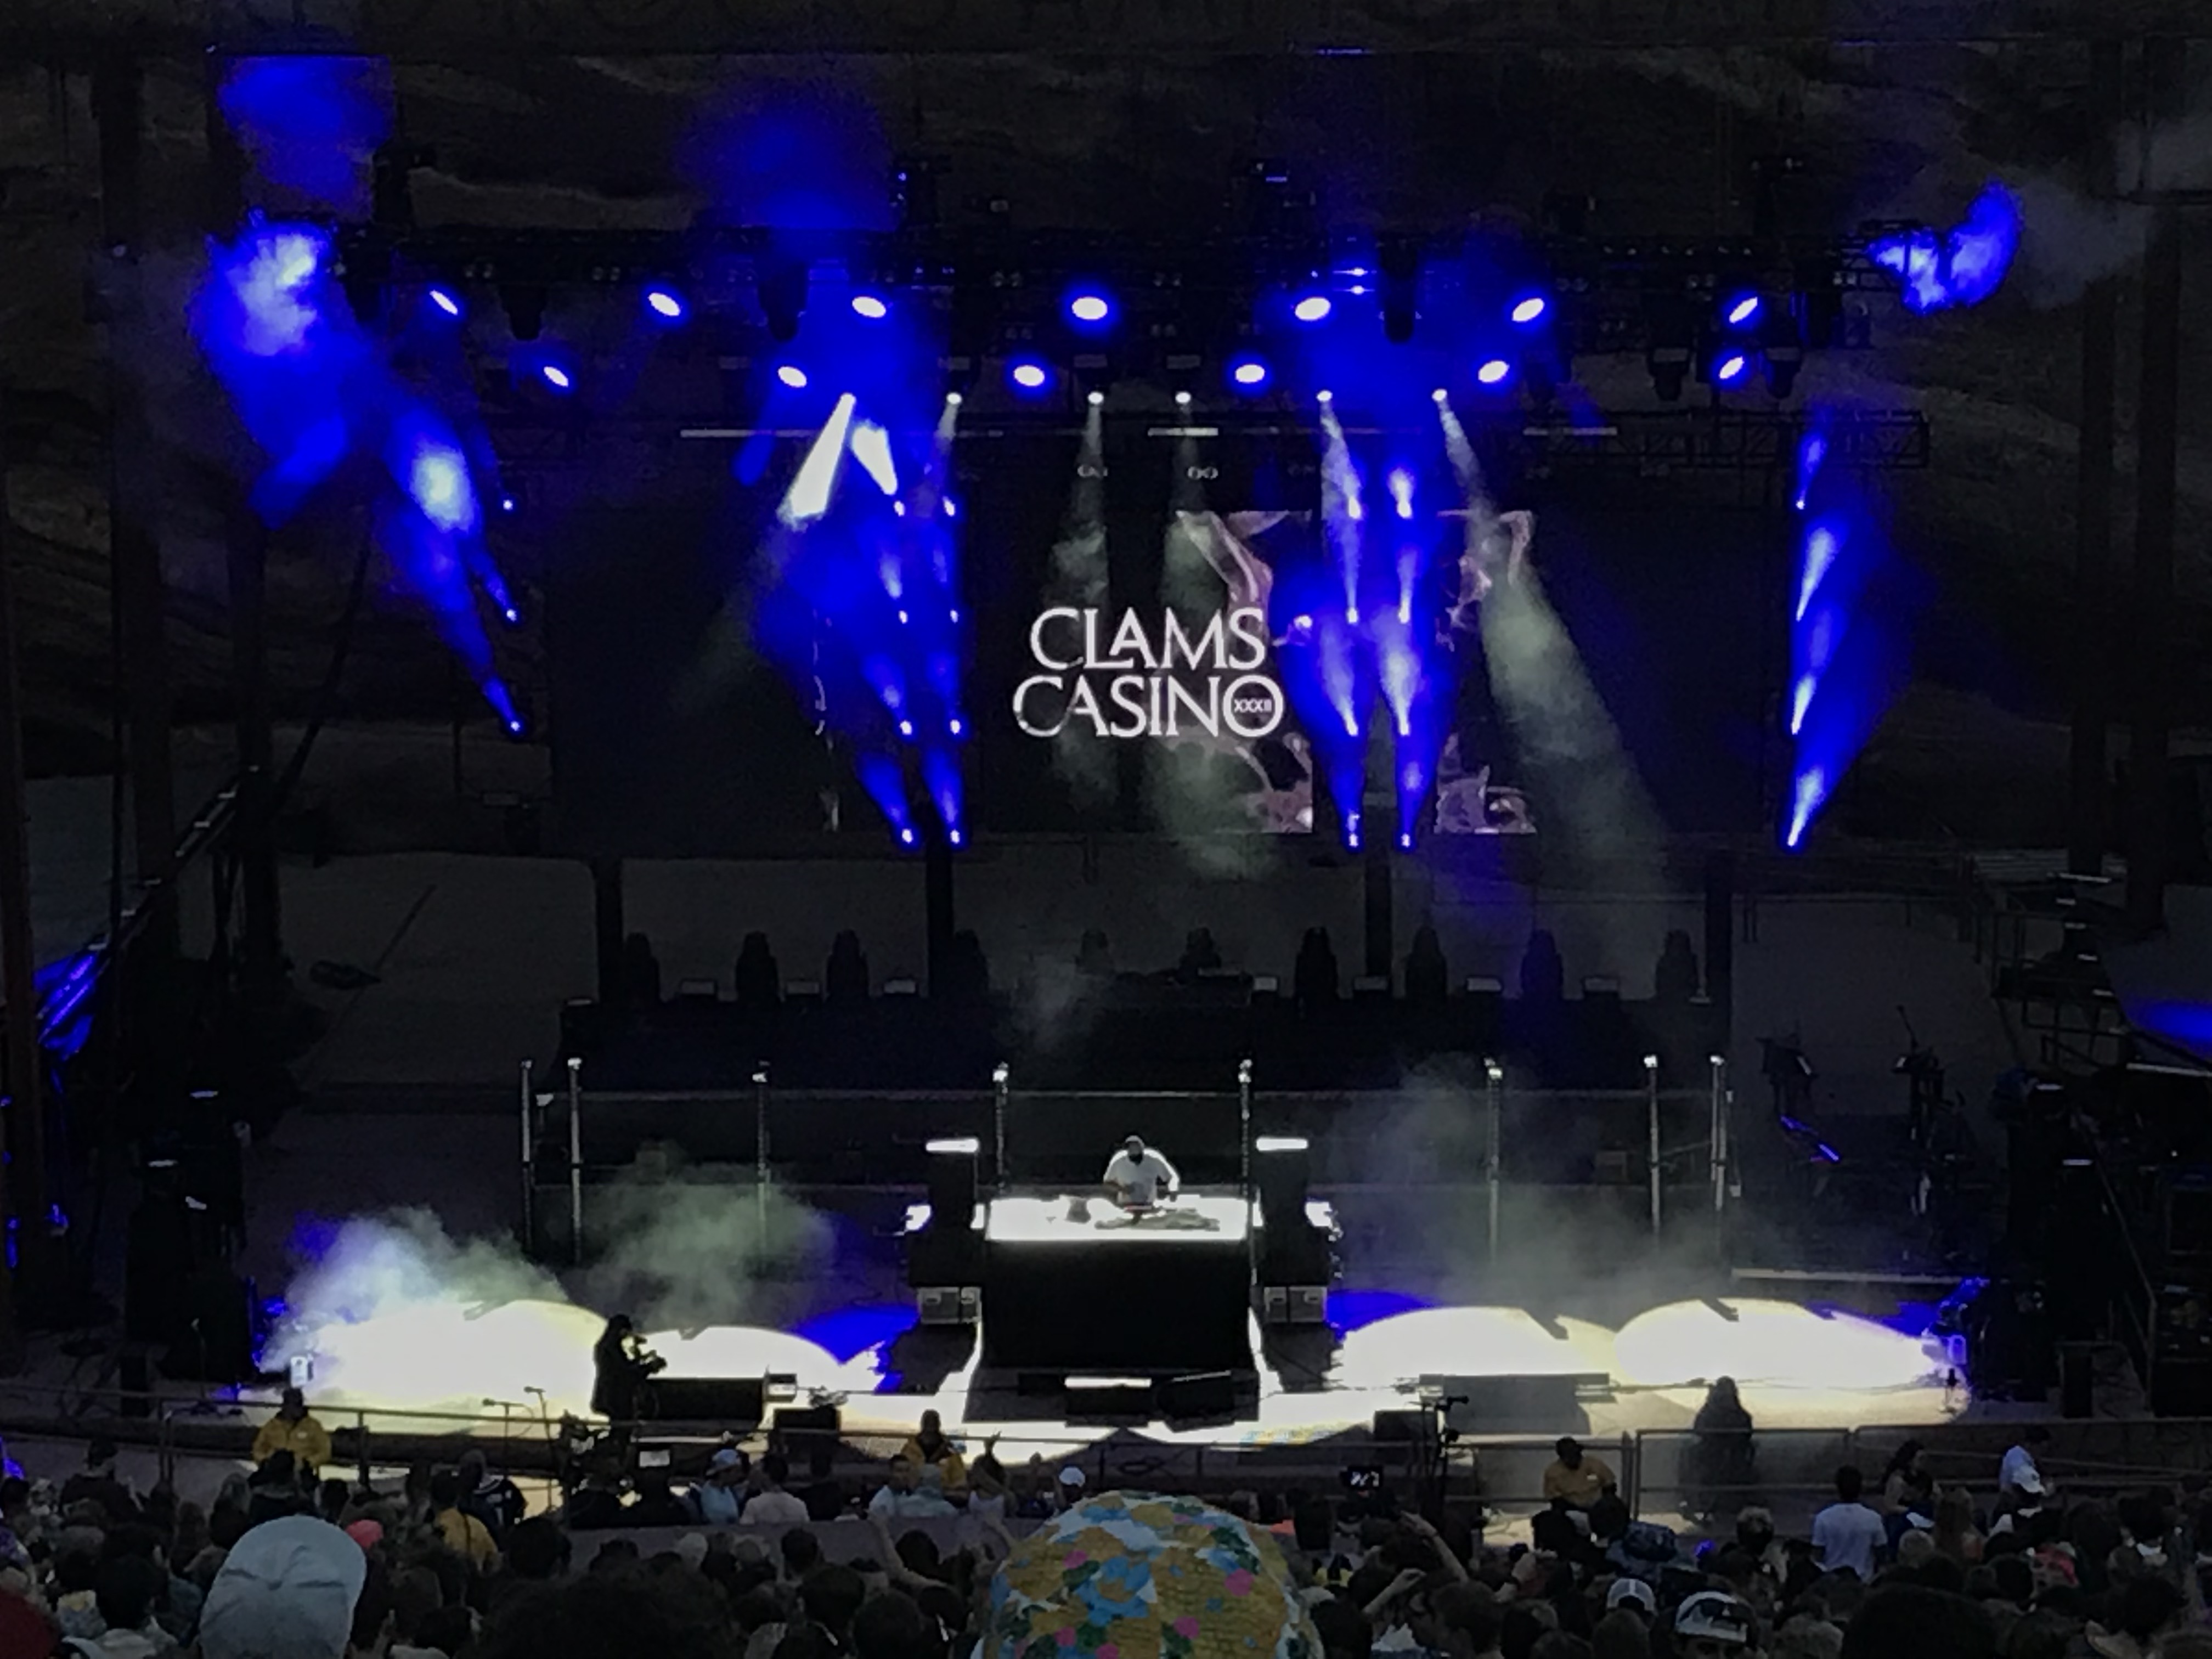 Clams Casino performs at the world-renowned Red Rocks Amphitheater in Colorado